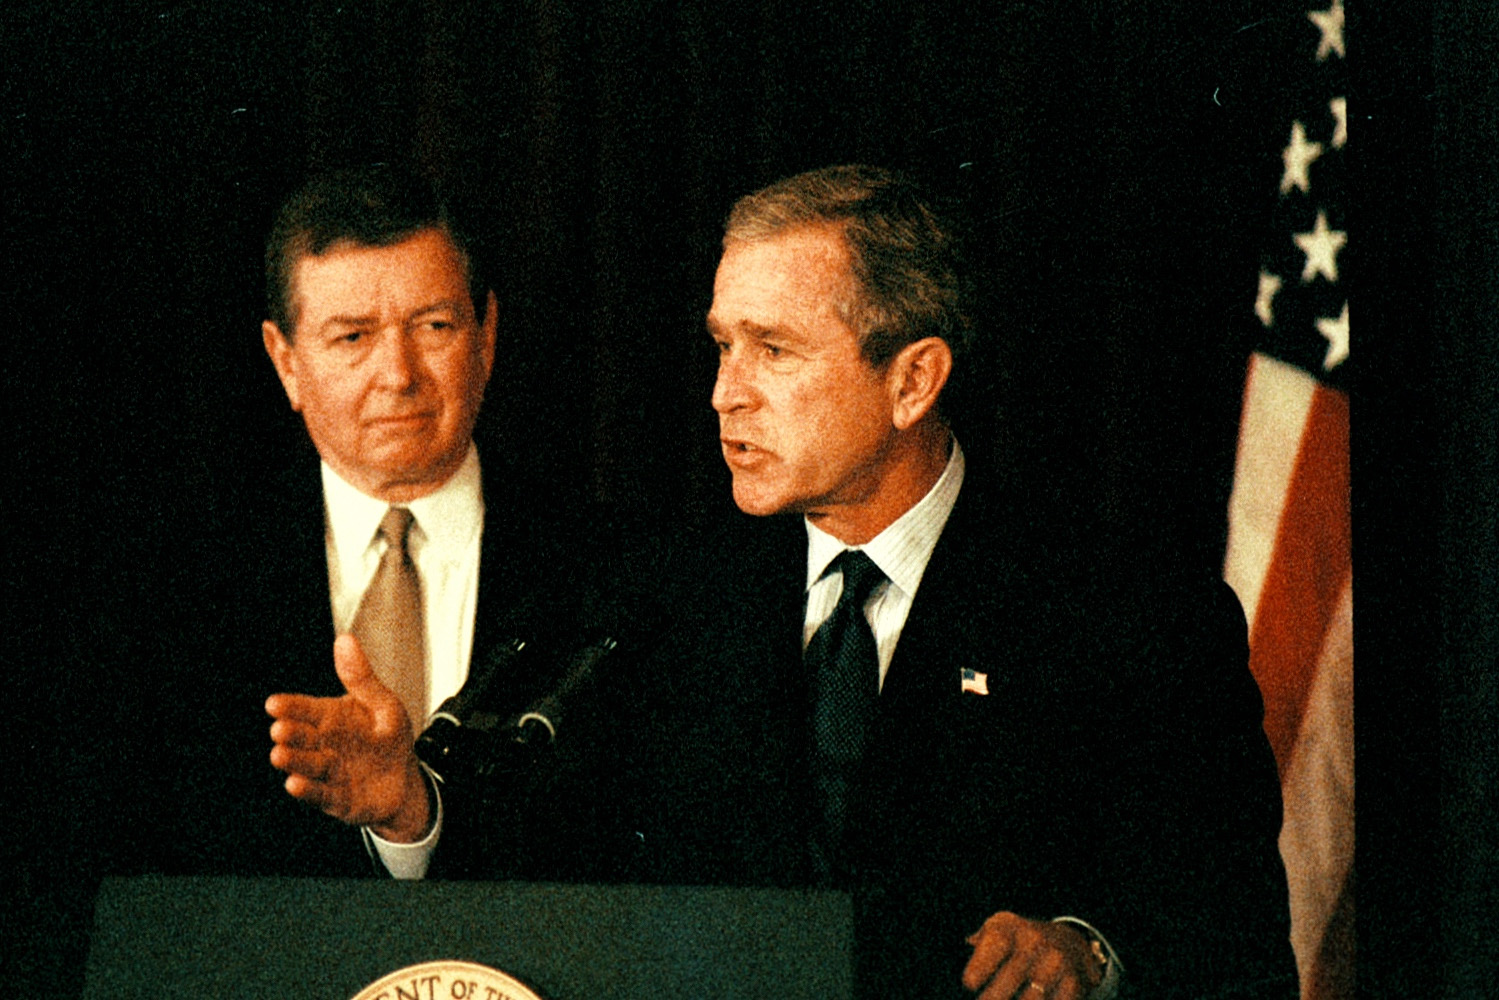 PHOTO: Flanked by then-U.S. Attorney General John Ashcroft, President George W. Bush announces the FBI's first Most Wanted Terrorist list at FBI headquarters on Oct. 10, 2001.